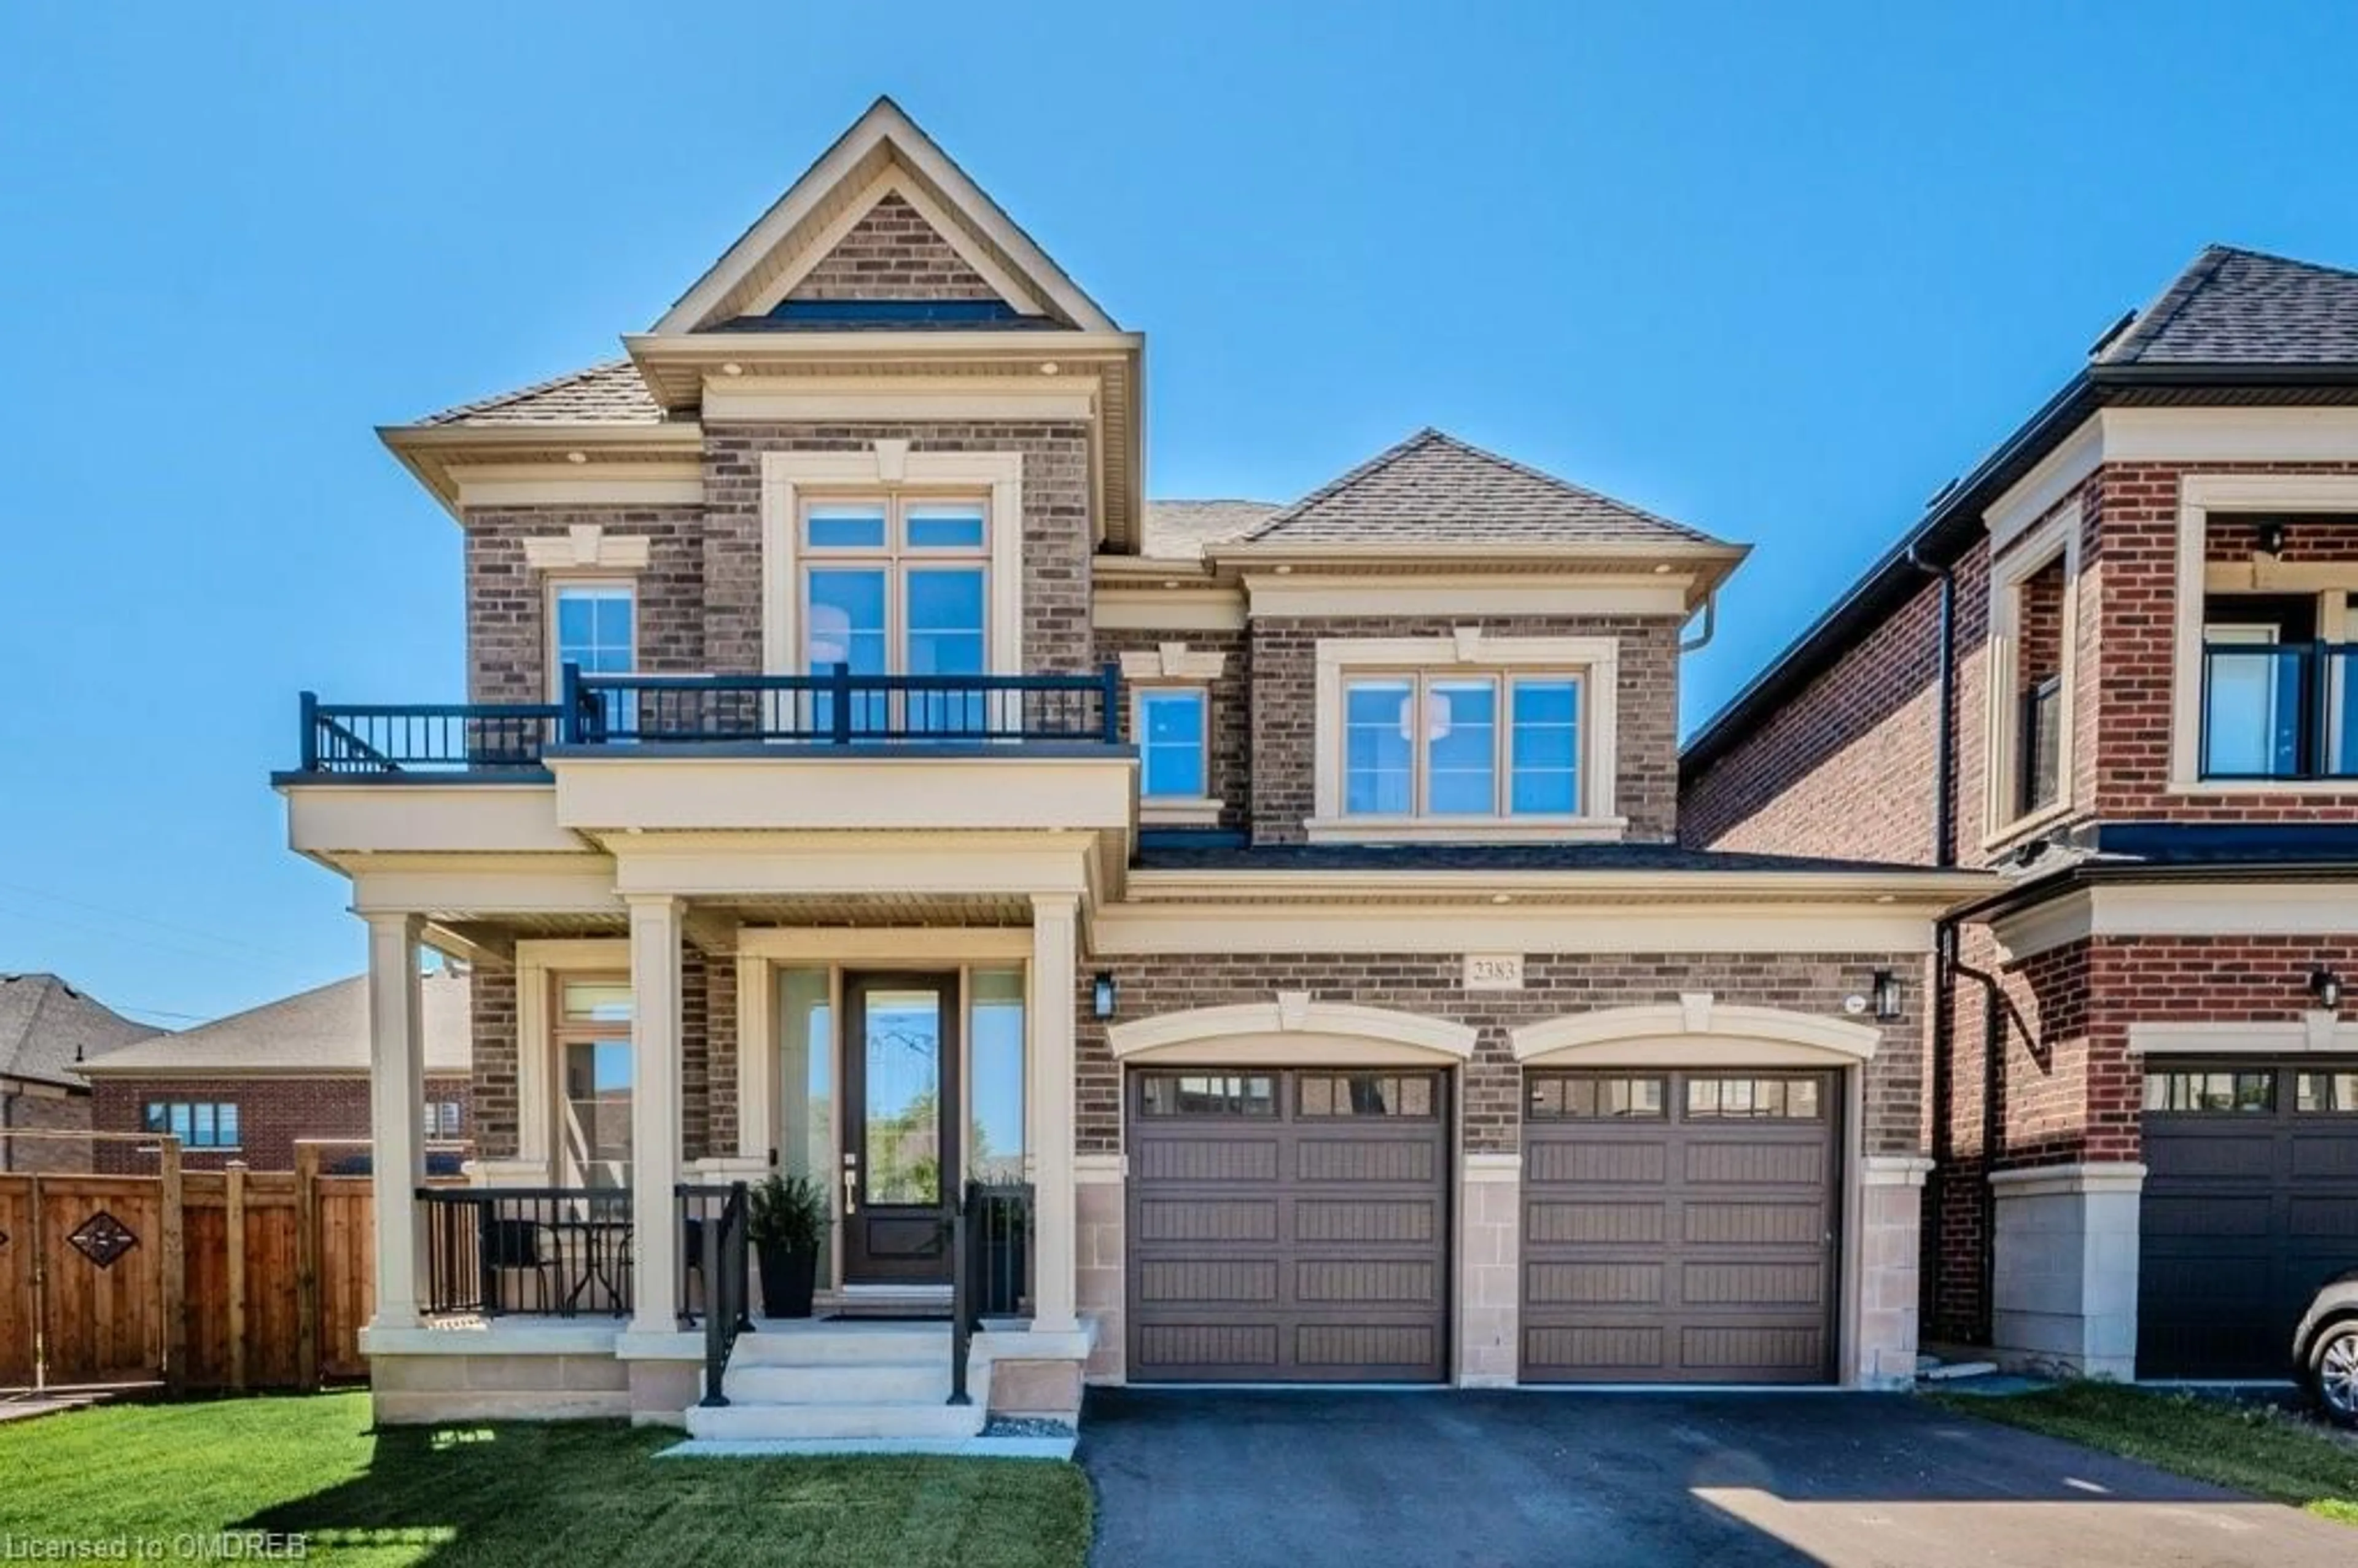 Home with brick exterior material for 2383 Irene Crescent, Oakville Ontario L6M 5M3